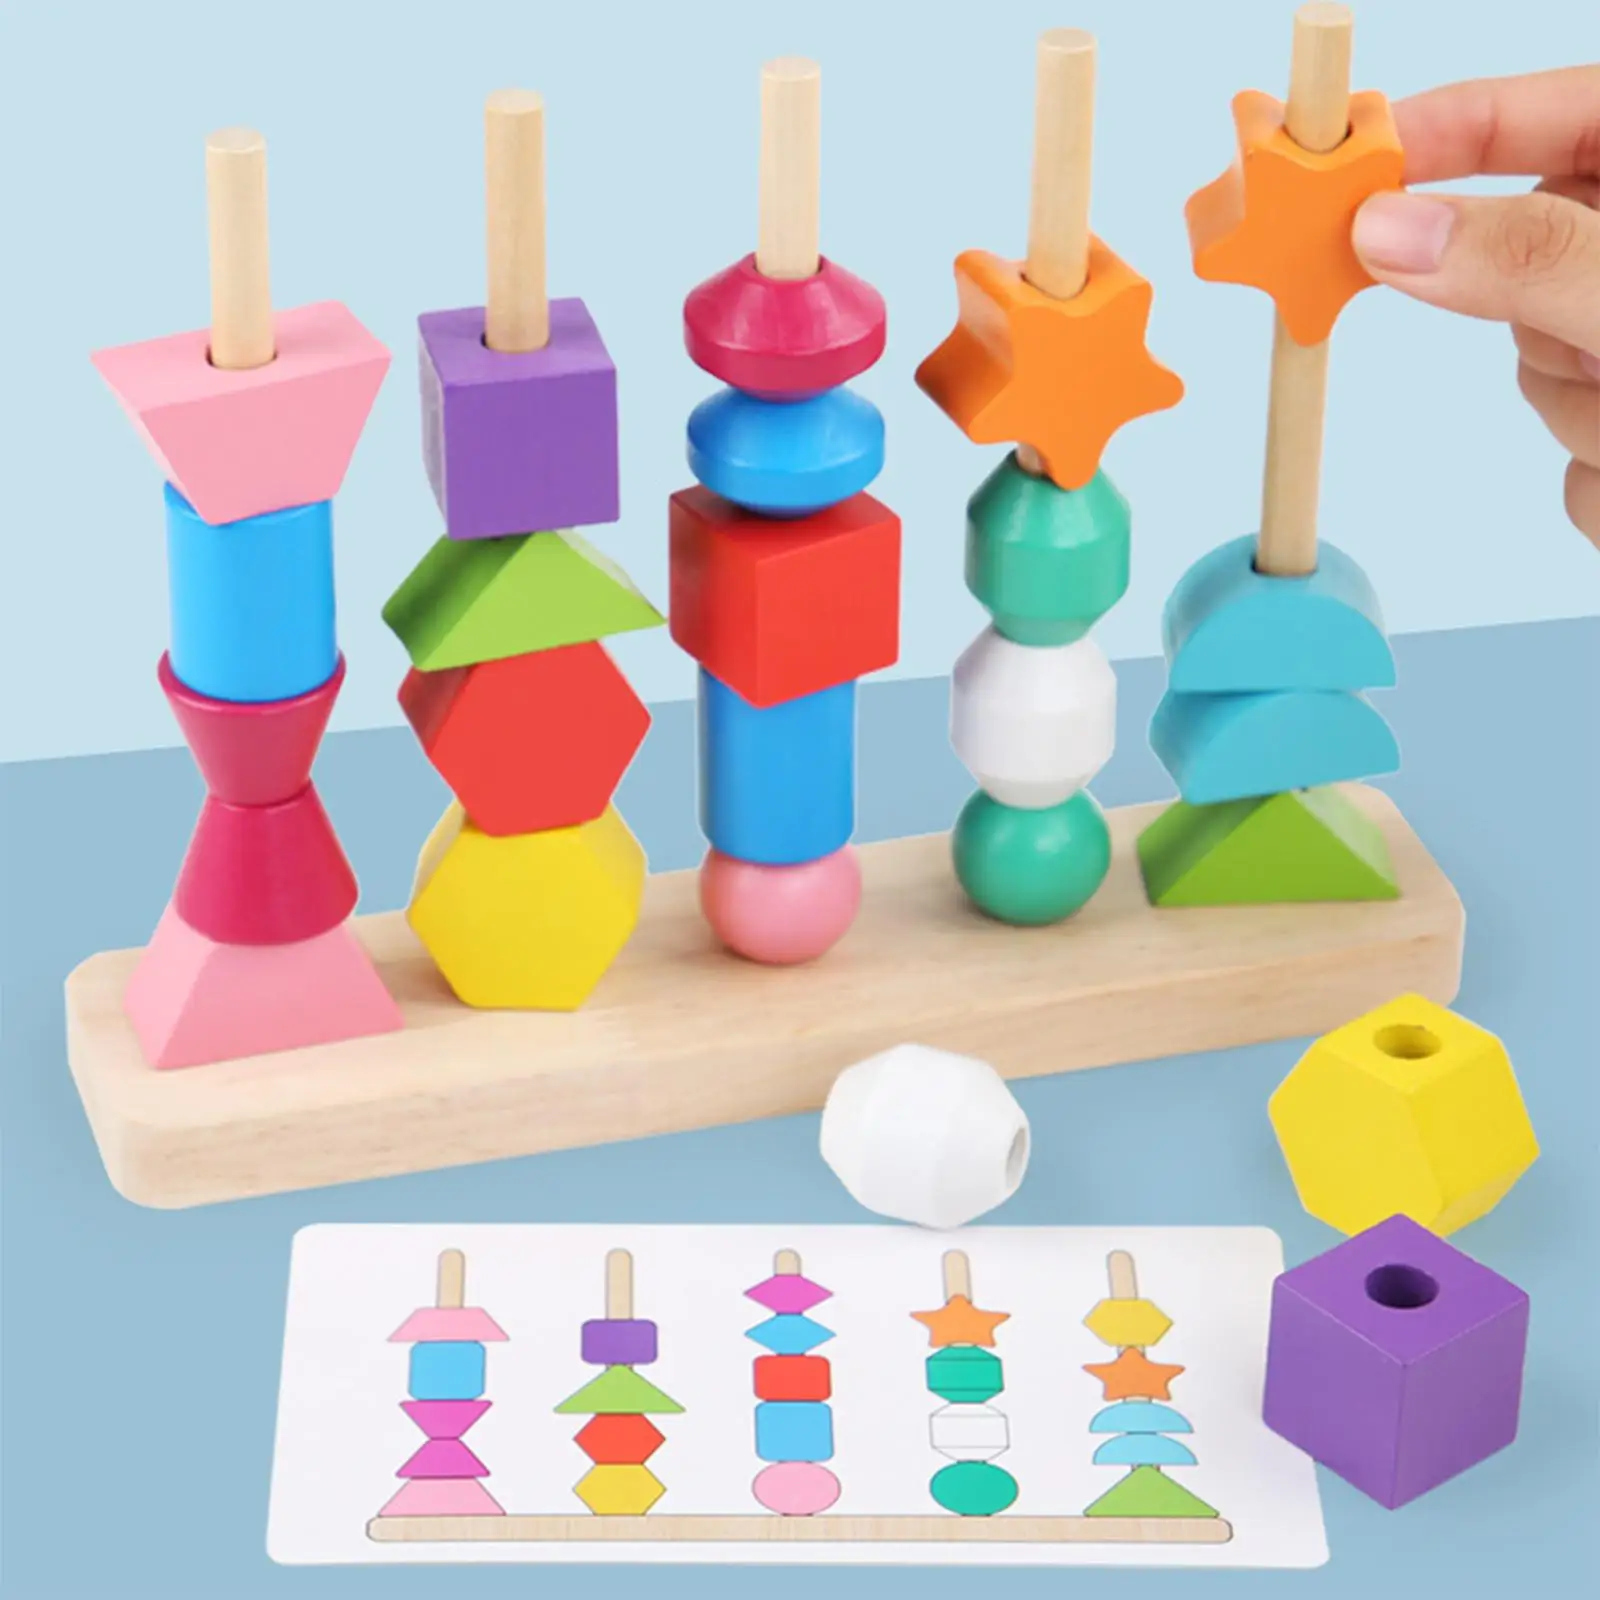 Set of Five Beaded Toys Colorful Educational Wooden Blocks for Birthday Gift